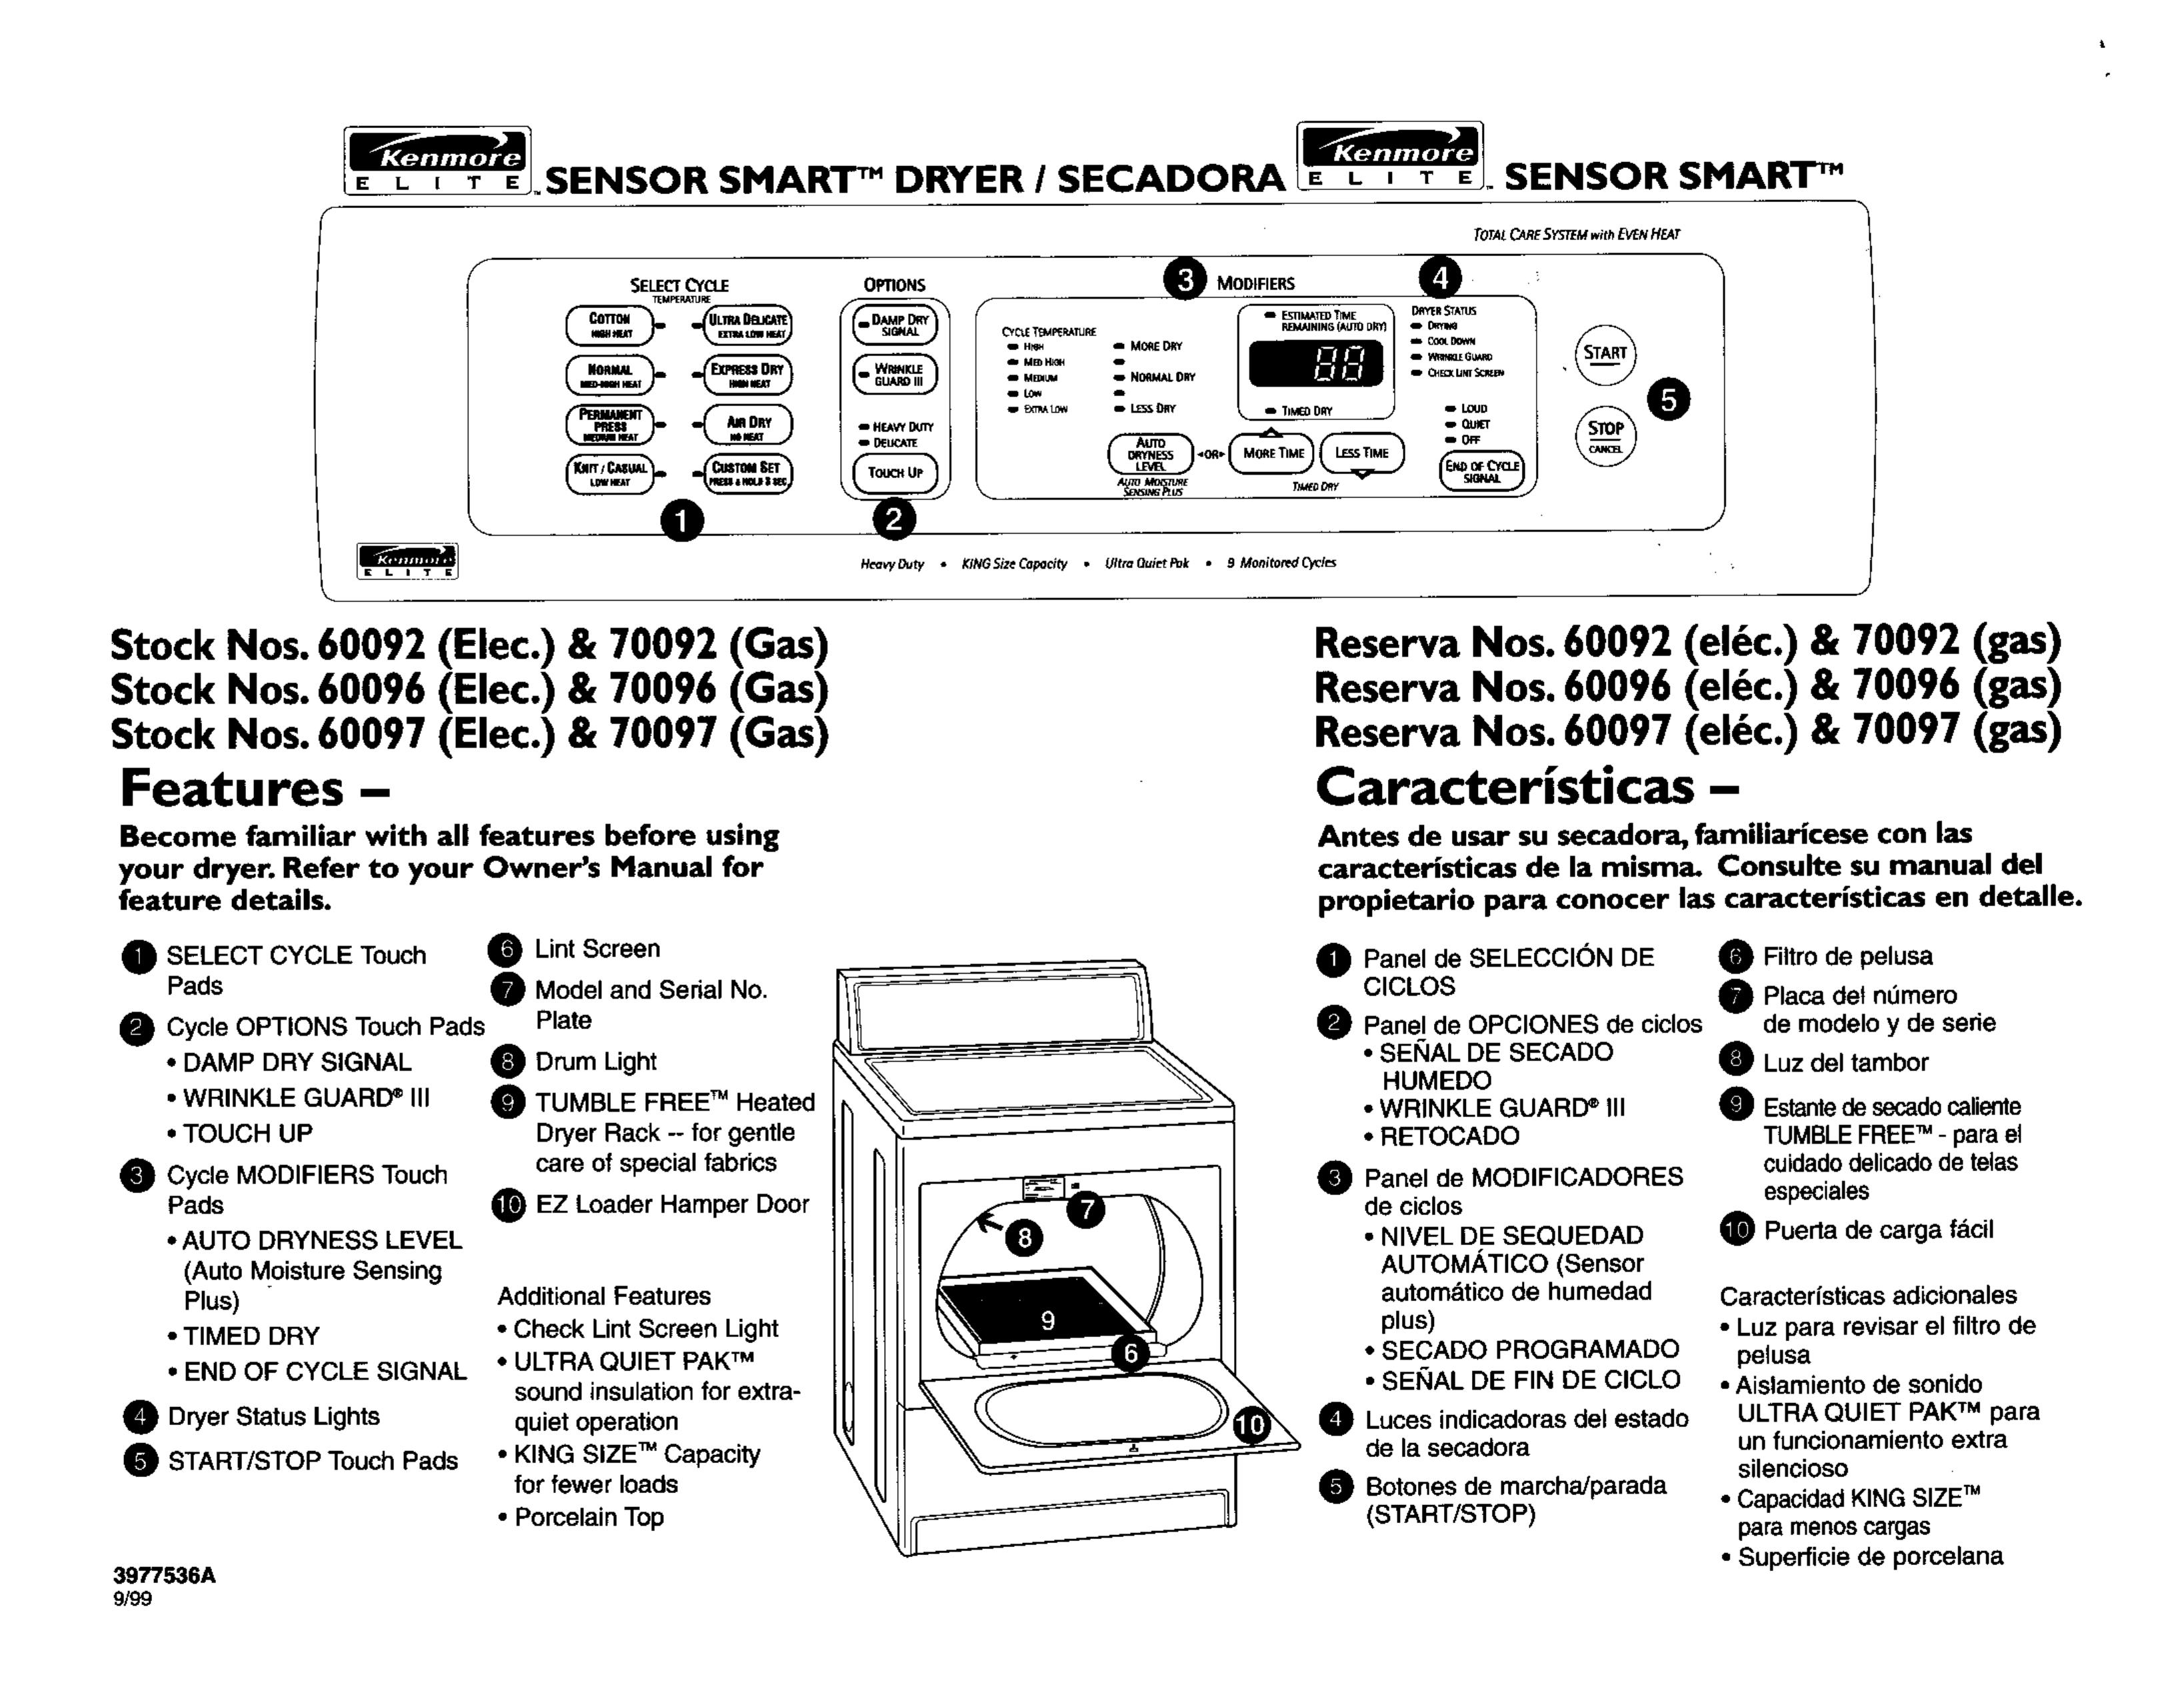 Kenmore 70097 Clothes Dryer User Manual